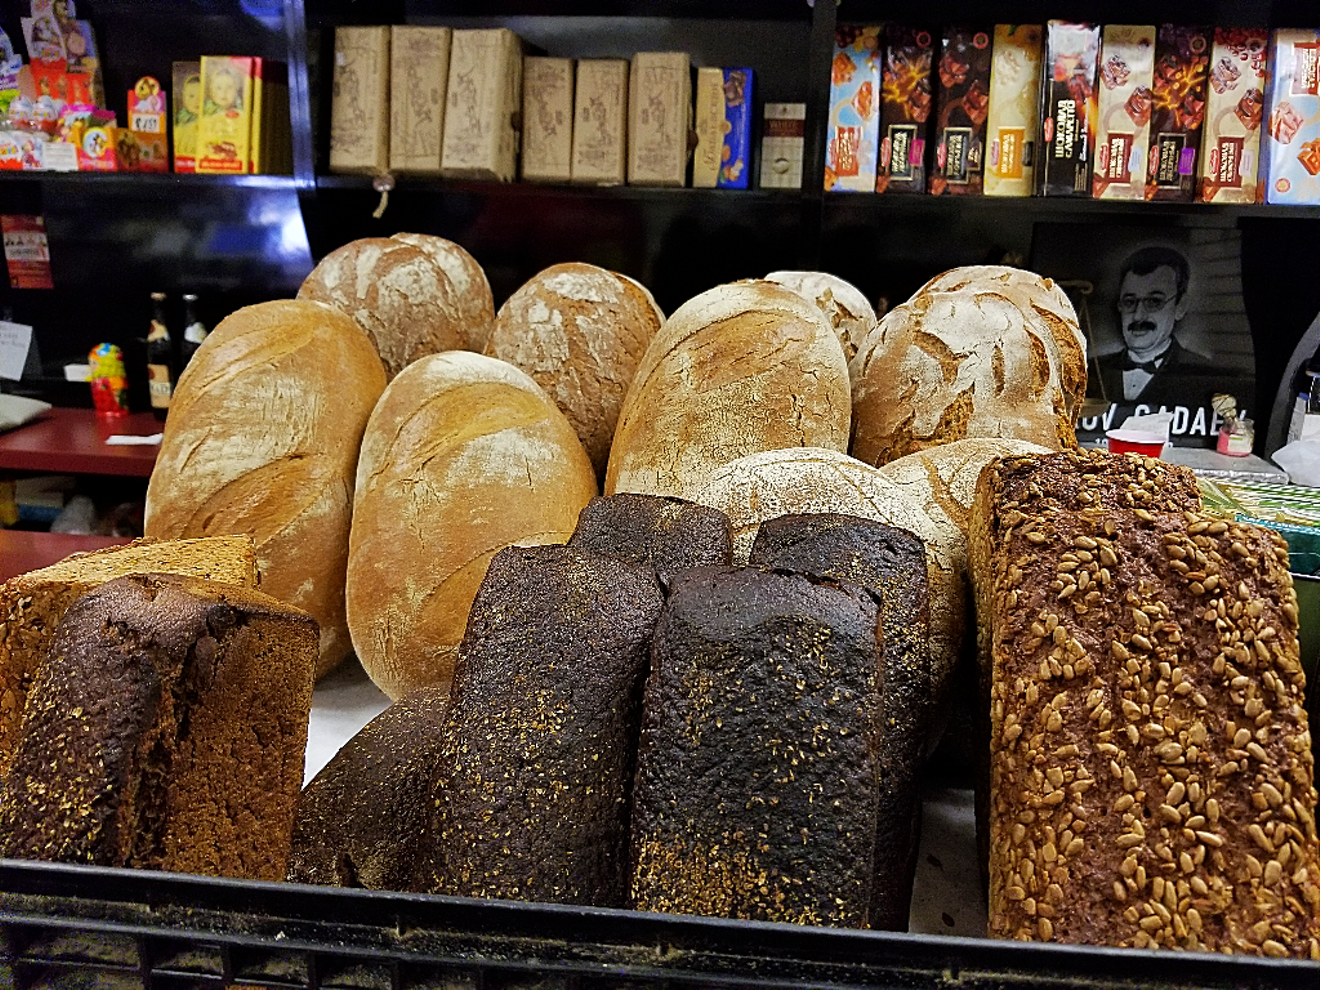 Fresh-baked rye bread loaves are a signature item at this classic Phoenix market.